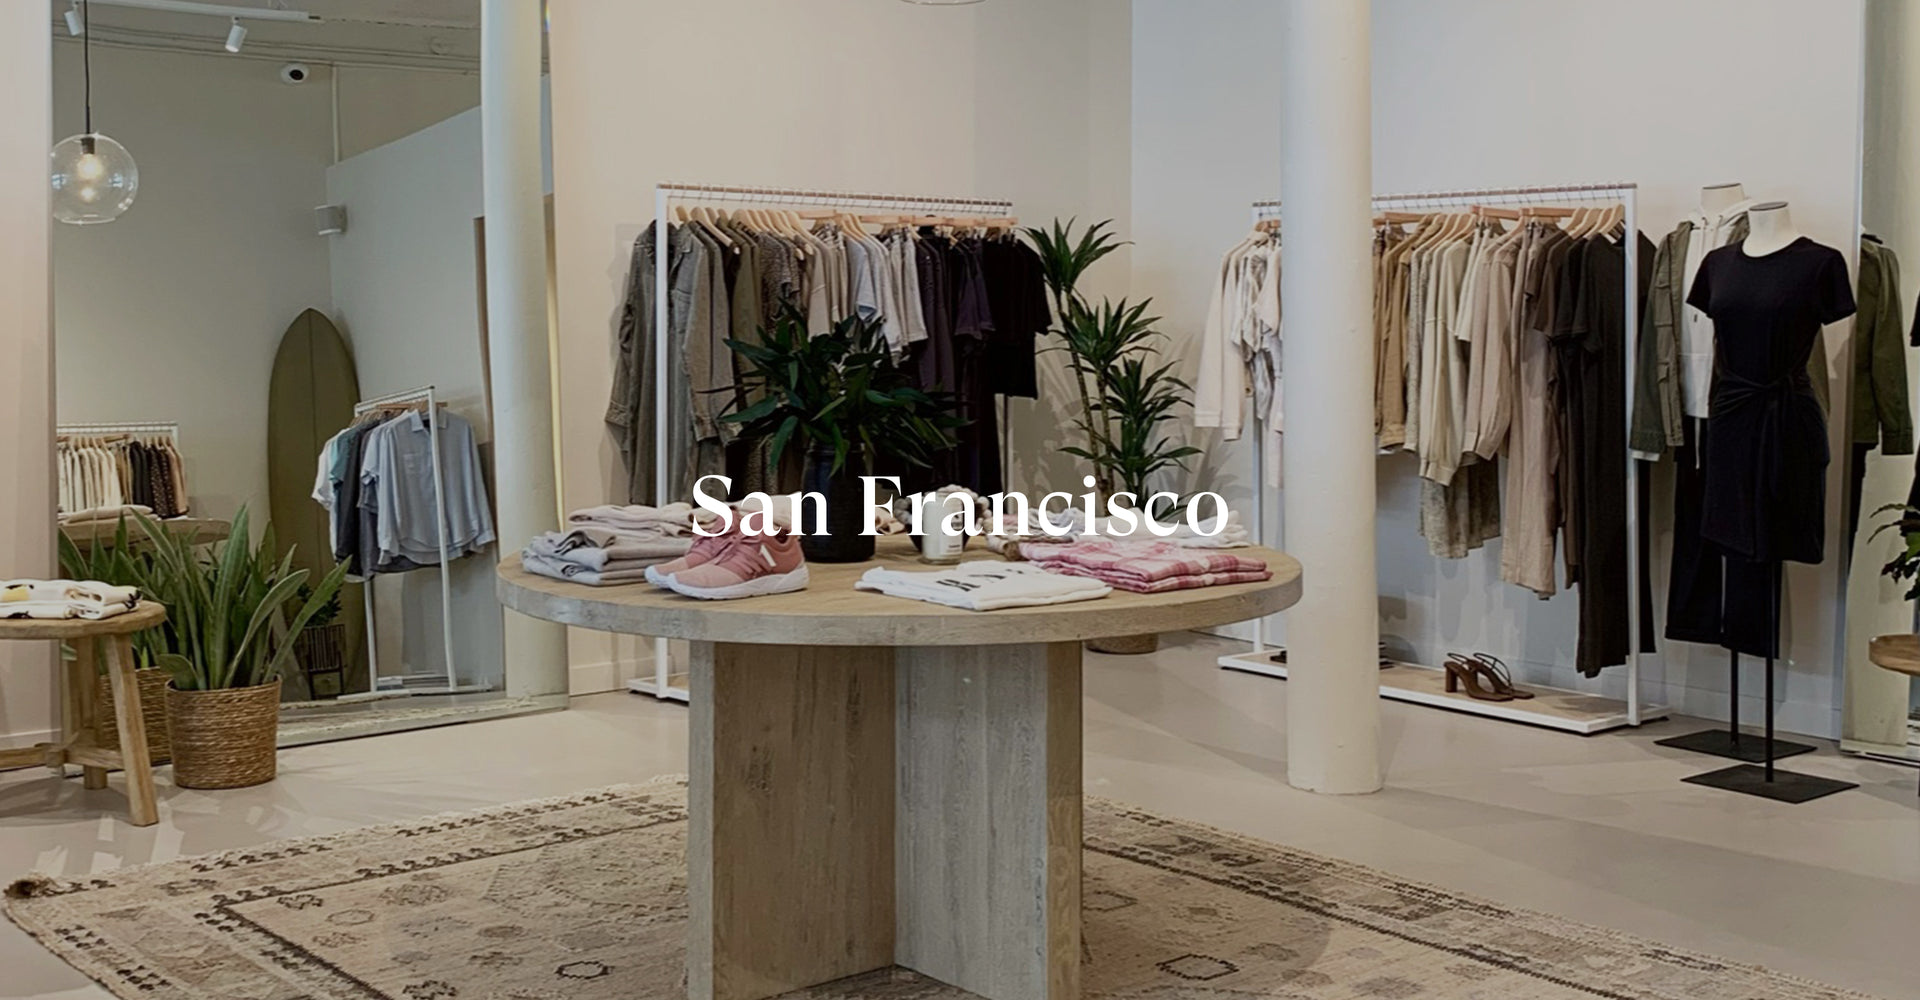 IMAGE SHOWS INSIDE OF SAN FRANCISCO STORE